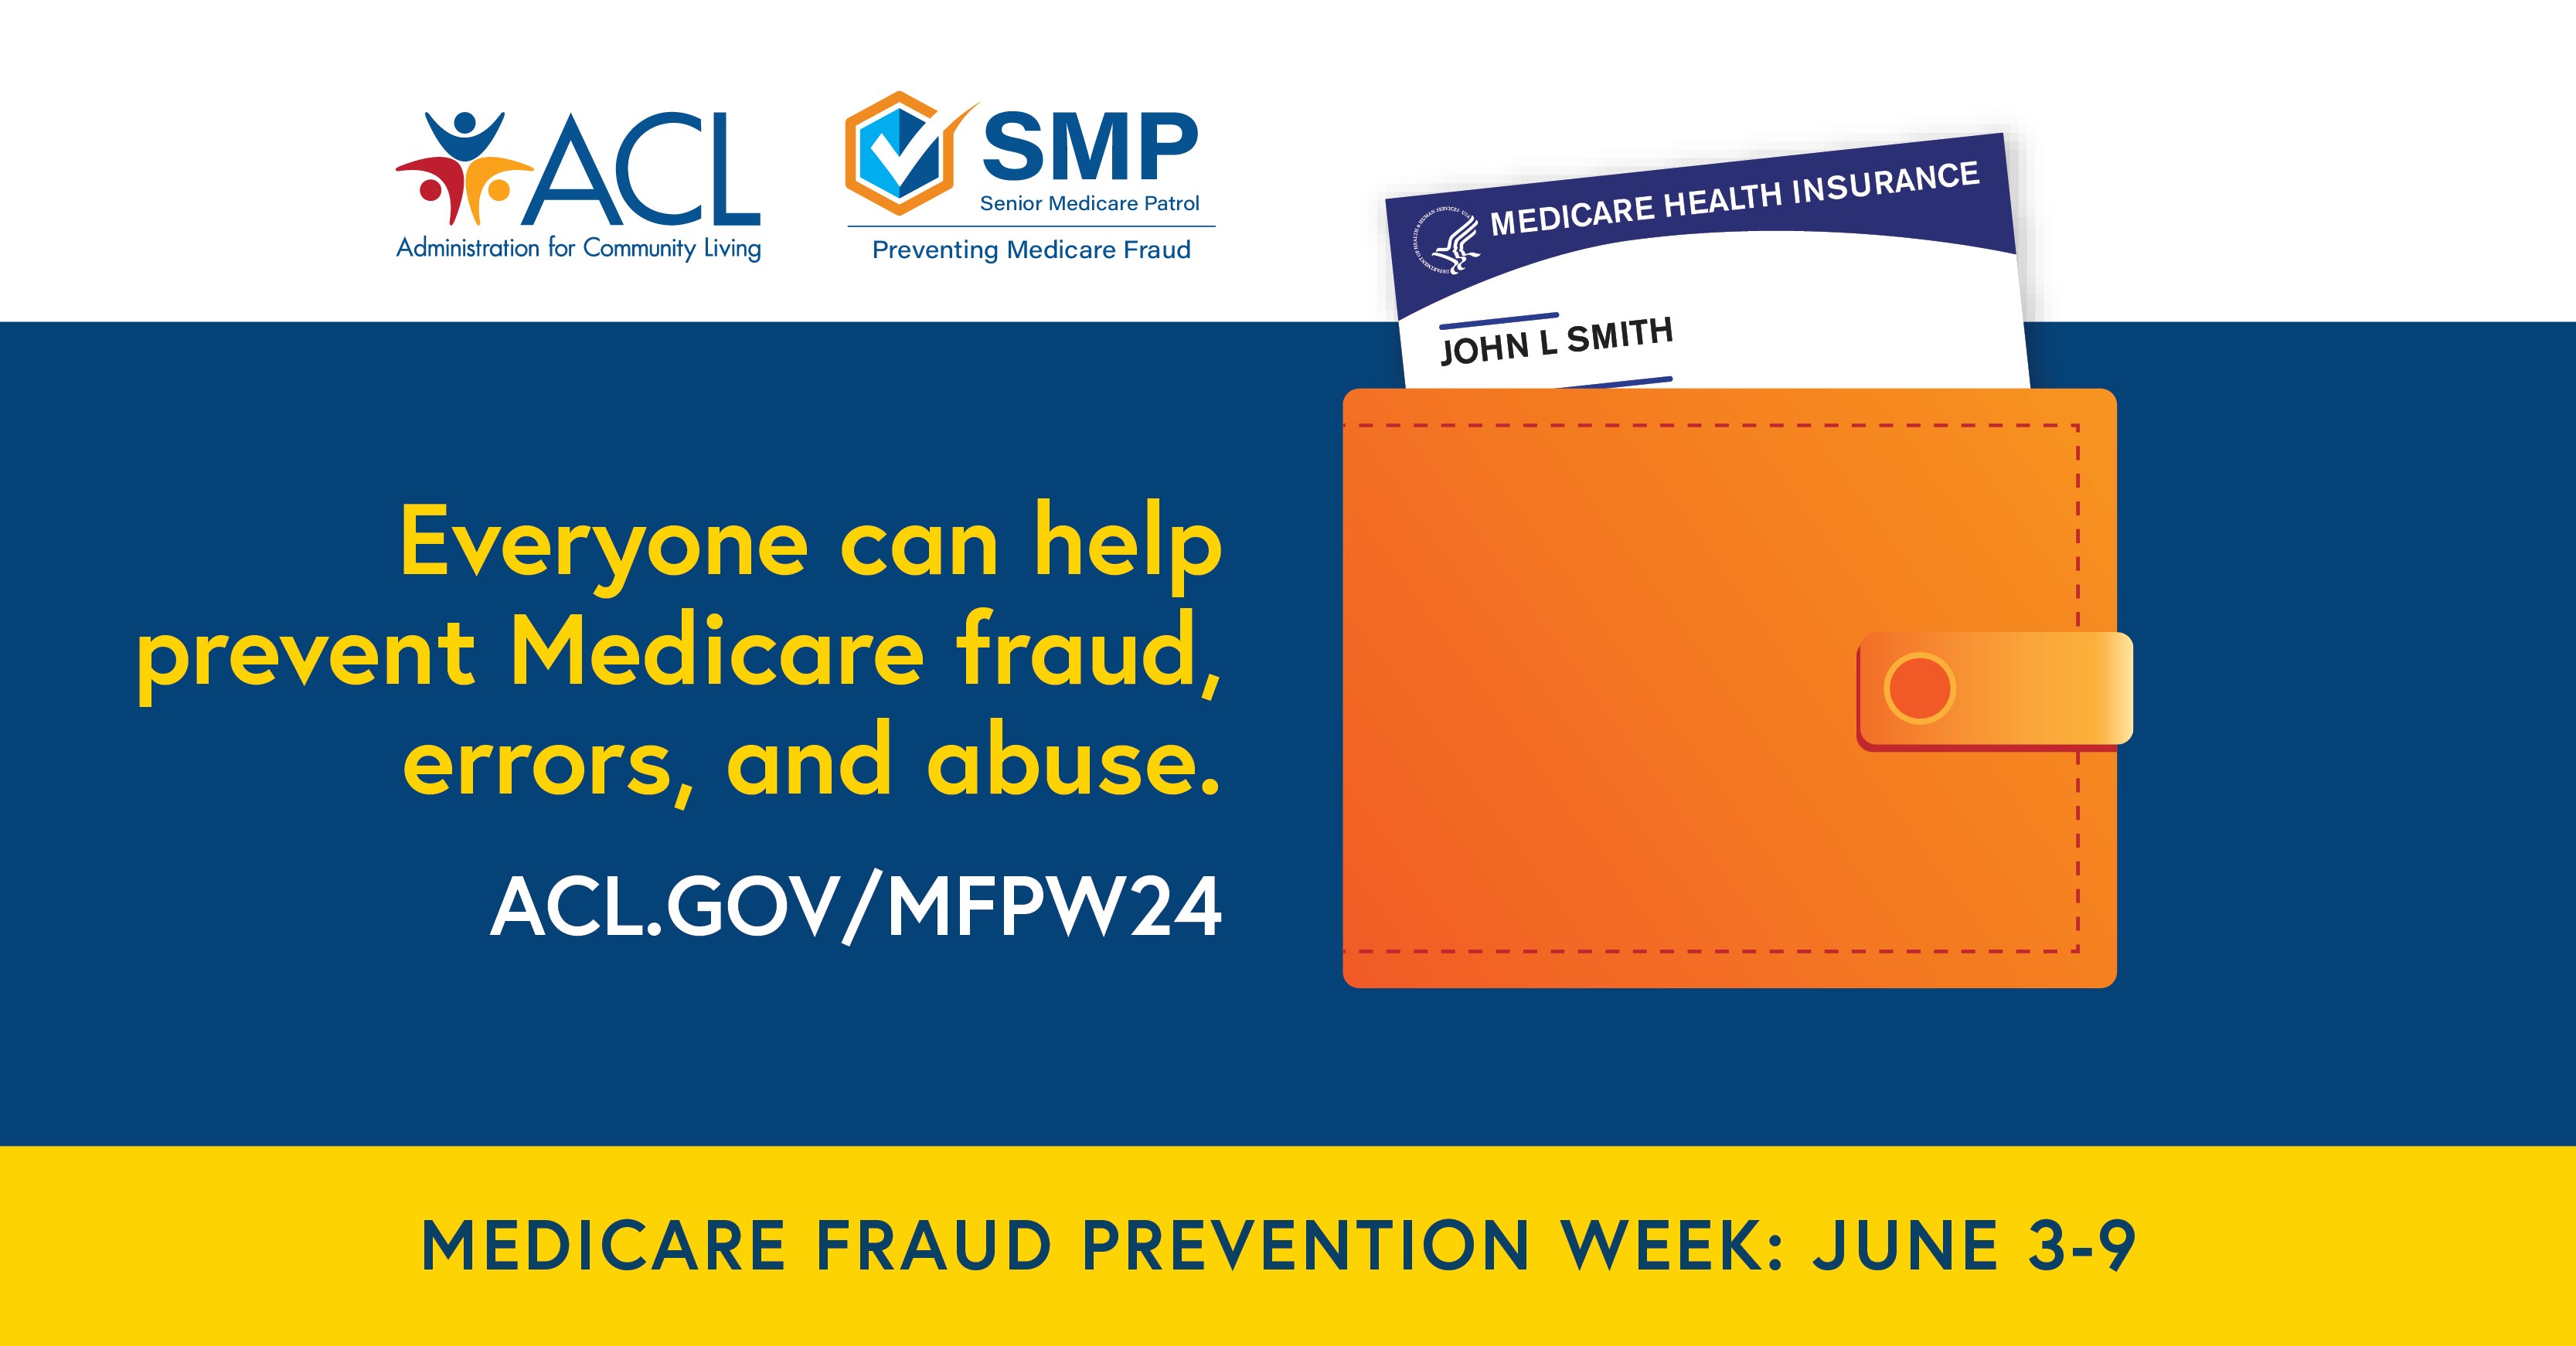 Everyone can help prevent Medicare fraud, errors, and abuse. ACL.gov/MFPW24. Medicare Fraud Prevention Week: June 3-9. ACL logo, SMP logo